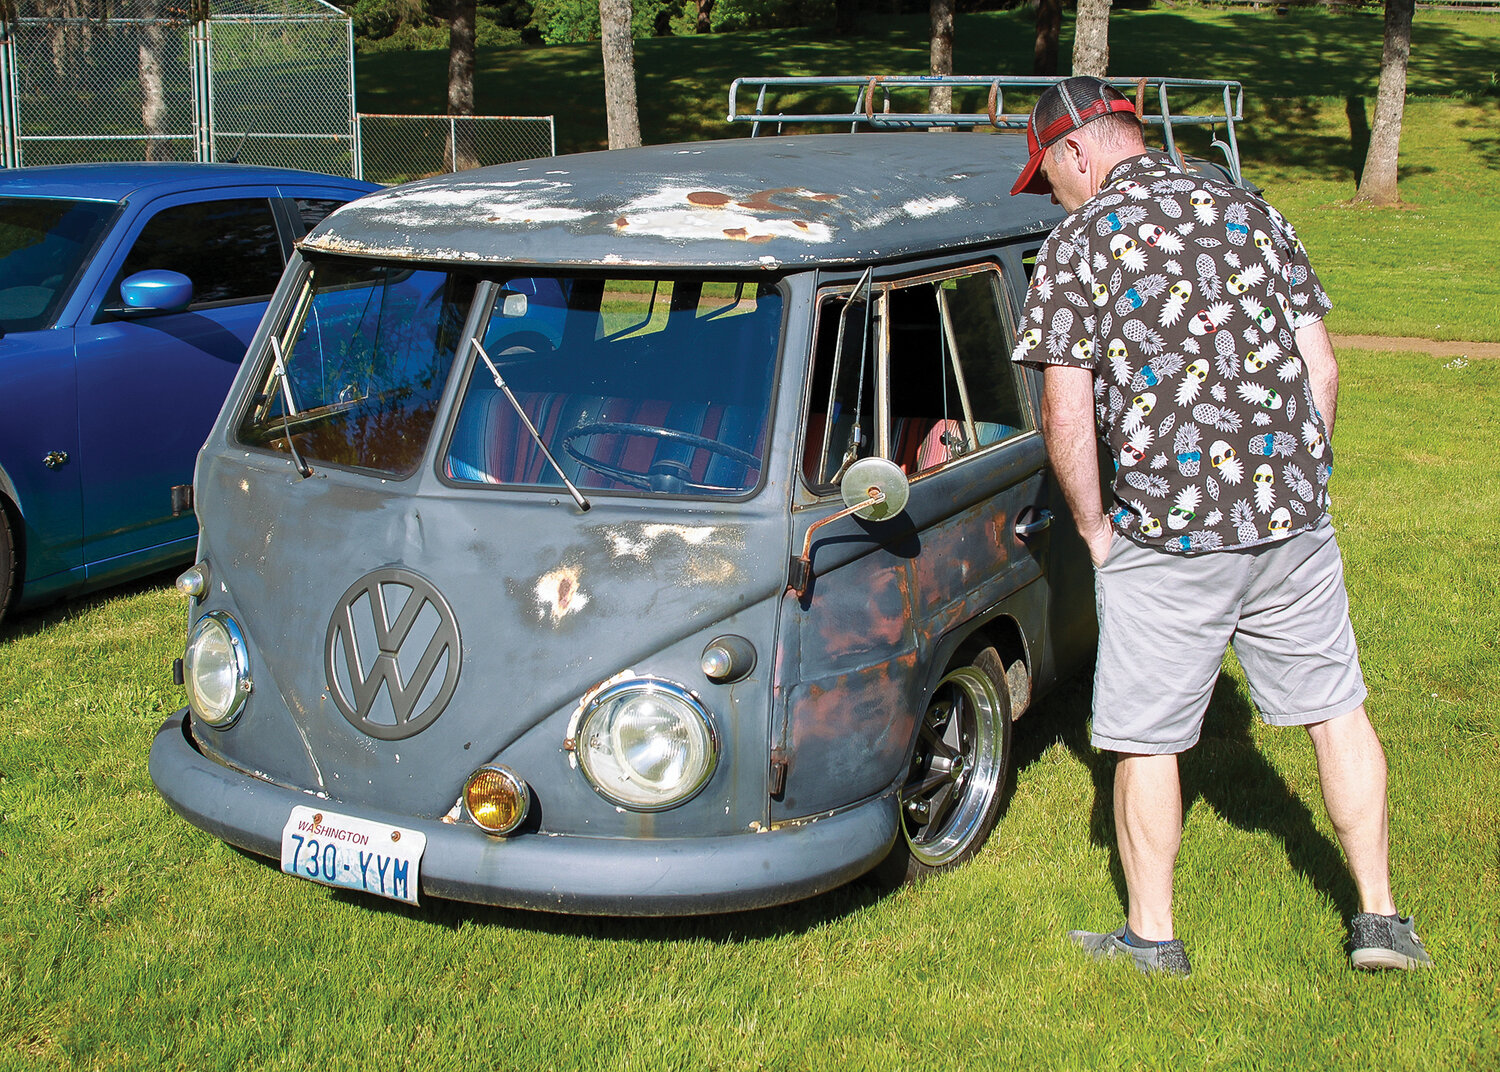 A Volkswagen bus is stationed at Alderbrook Park during the cruise-in on Friday, May 26.